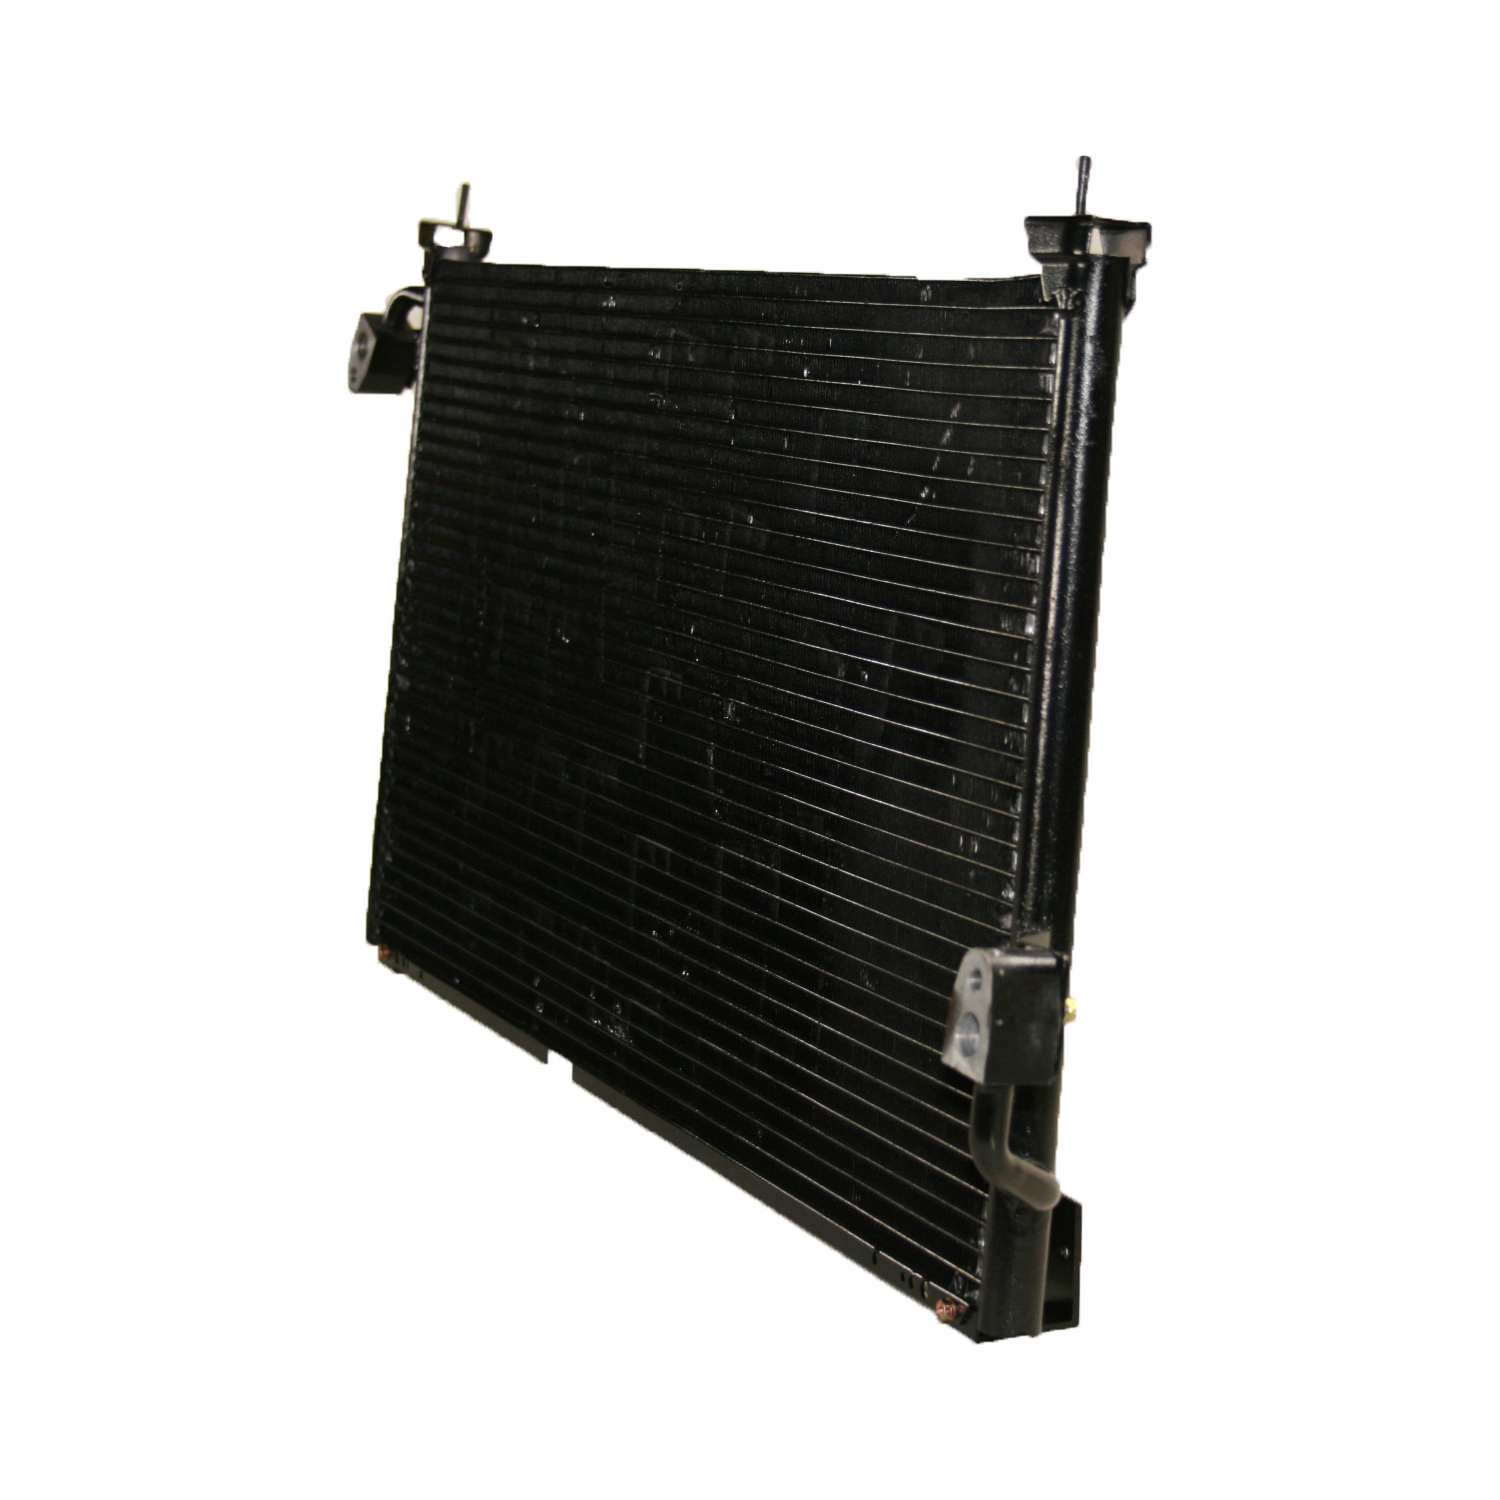 TCW Condenser 44-3022 New Product Image field_60b6a13a6e67c